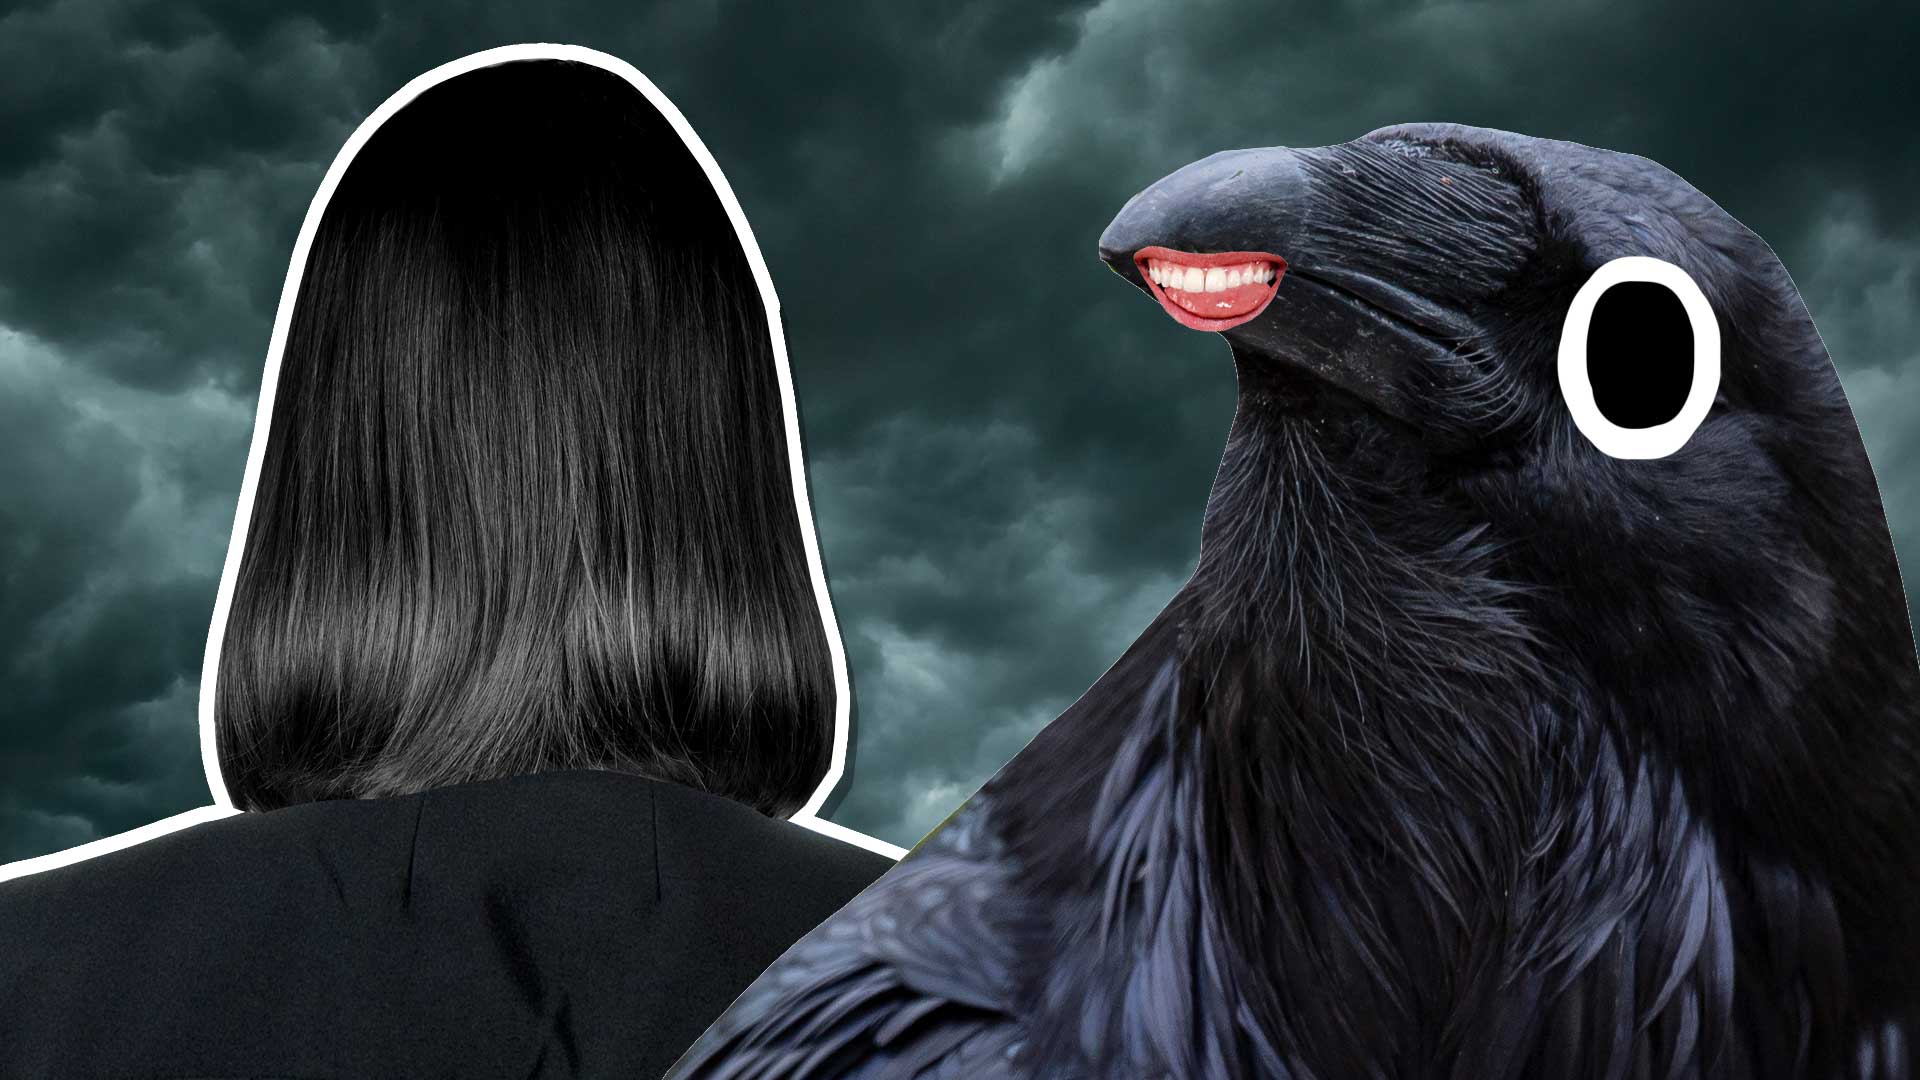 Snape and a big crow